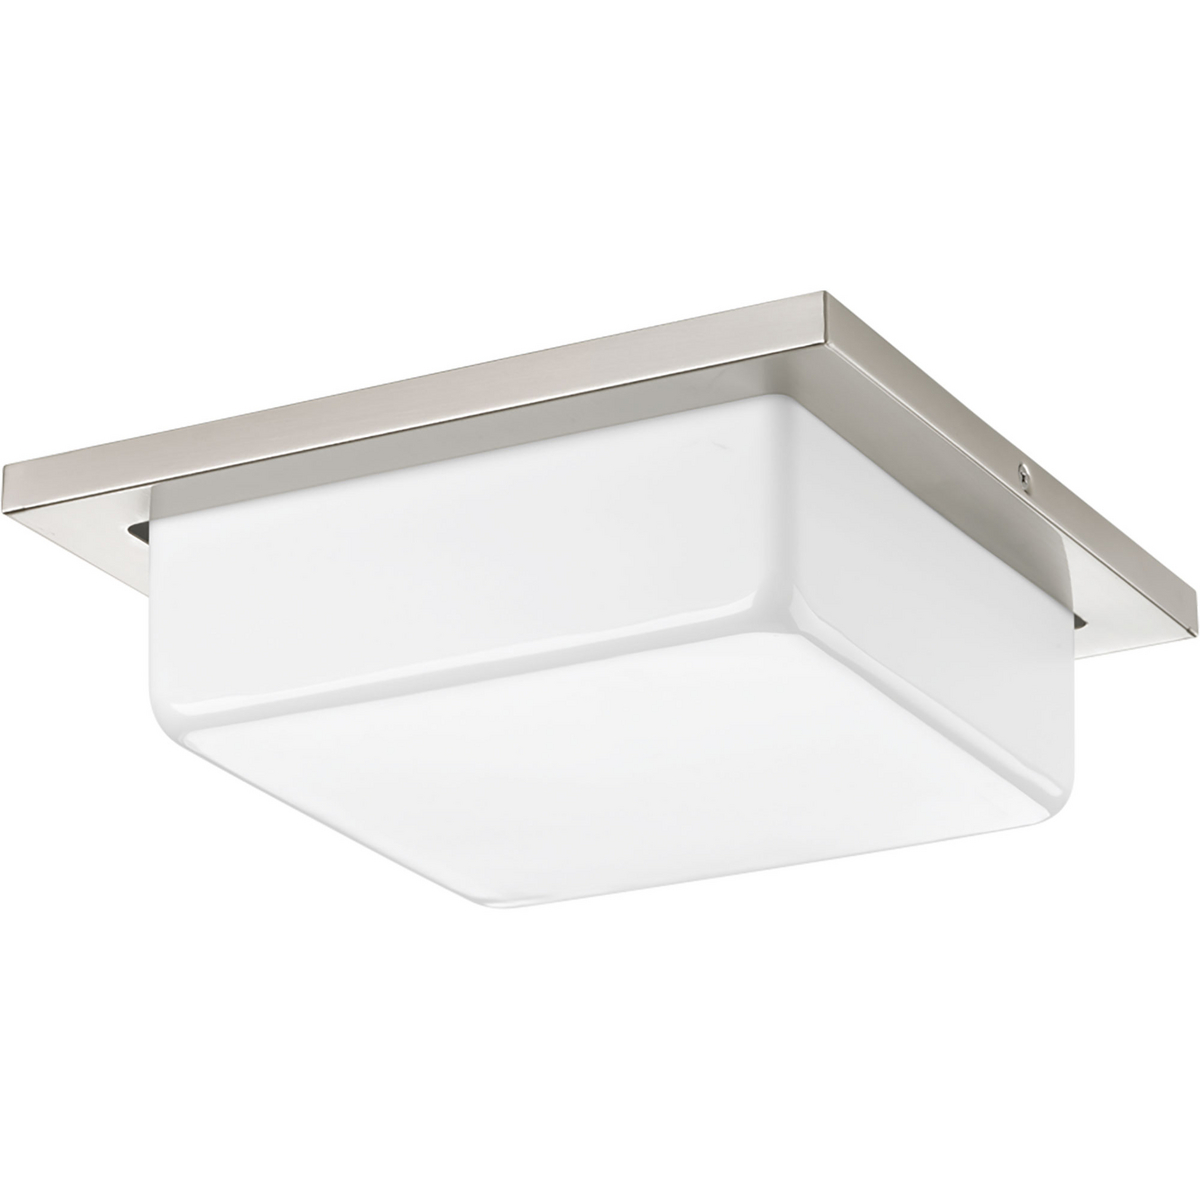 Transit is a uniquely styled series with clean design flexibility. This one-light LED close to ceiling featuring a white acrylic diffuser and Brushed Nickel finish can mount to either ceiling or wall.